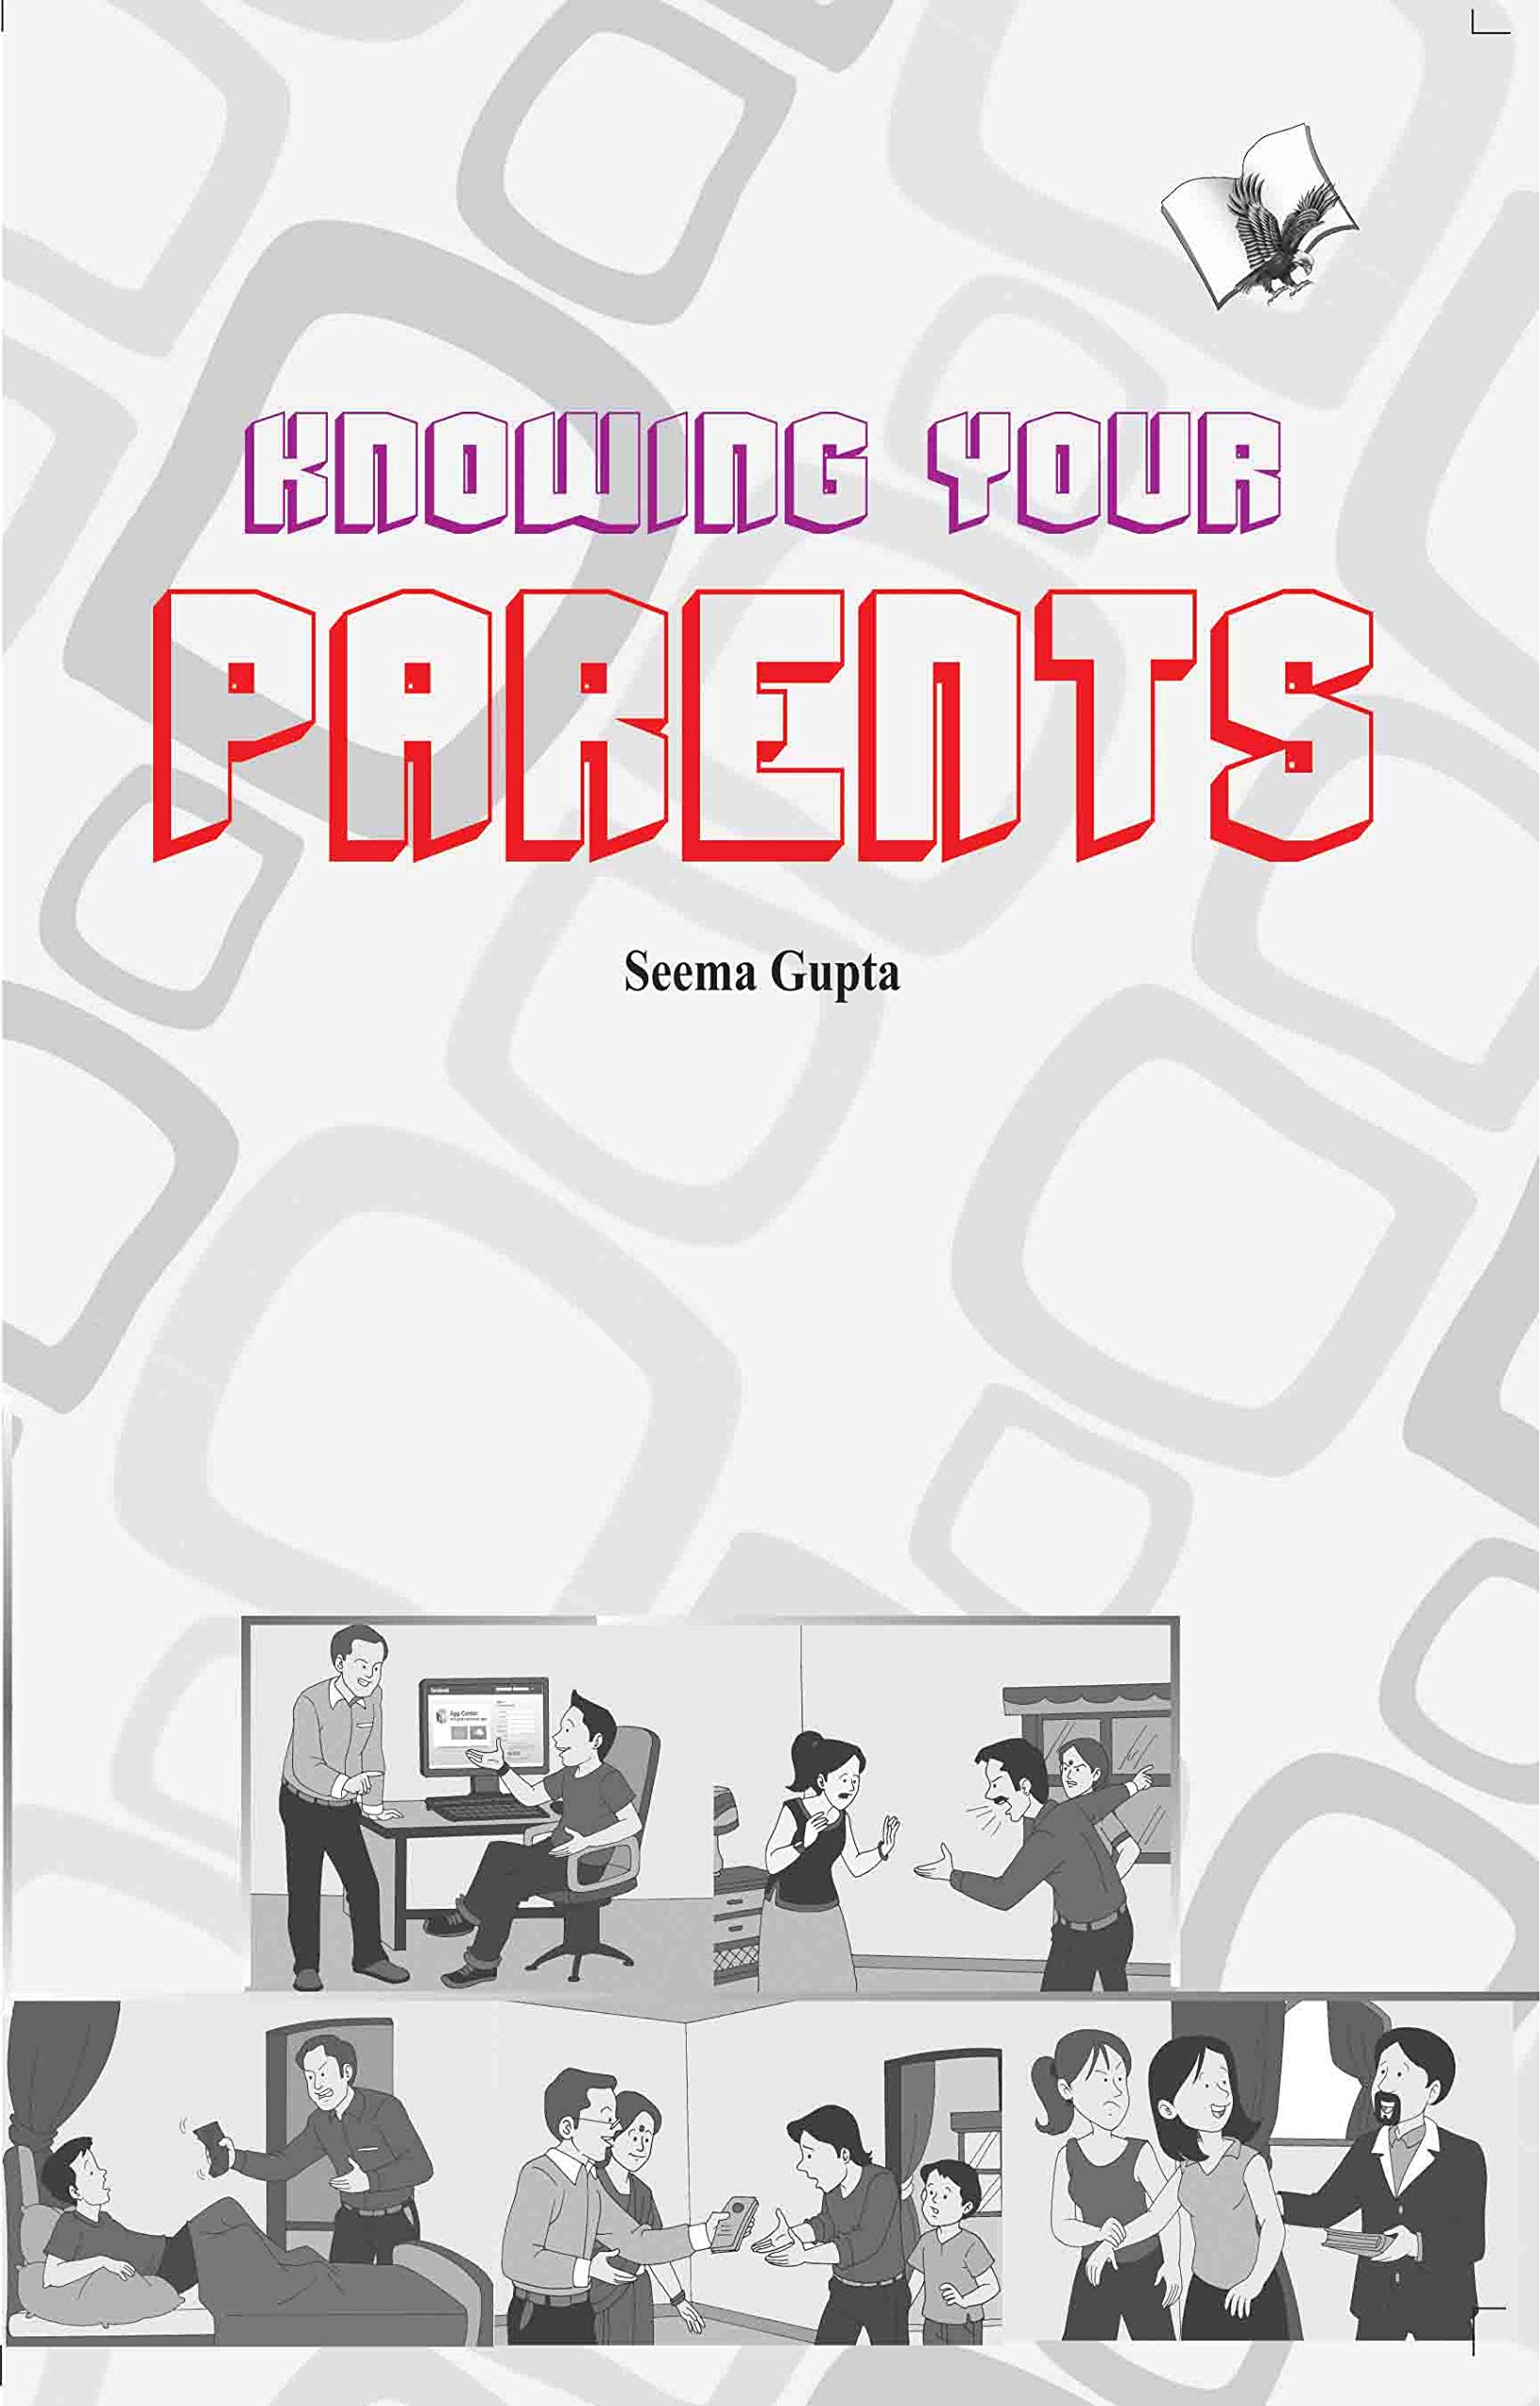 Knowing your parent: Bridging Gap Between Two Generations Smartly